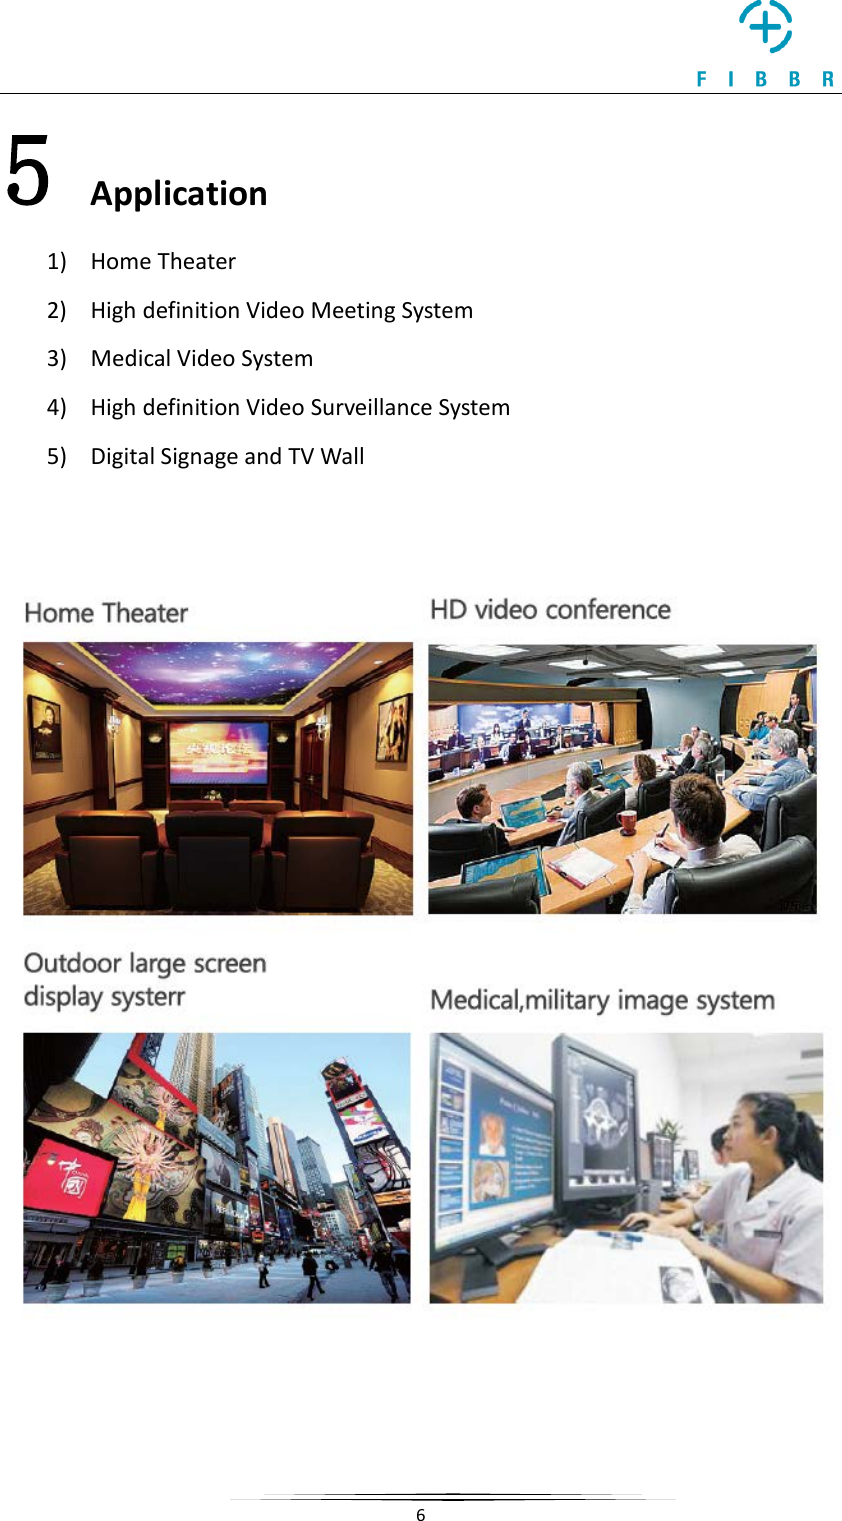     6  5 Application 1) Home Theater 2) High definition Video Meeting System 3) Medical Video System 4) High definition Video Surveillance System 5) Digital Signage and TV Wall       